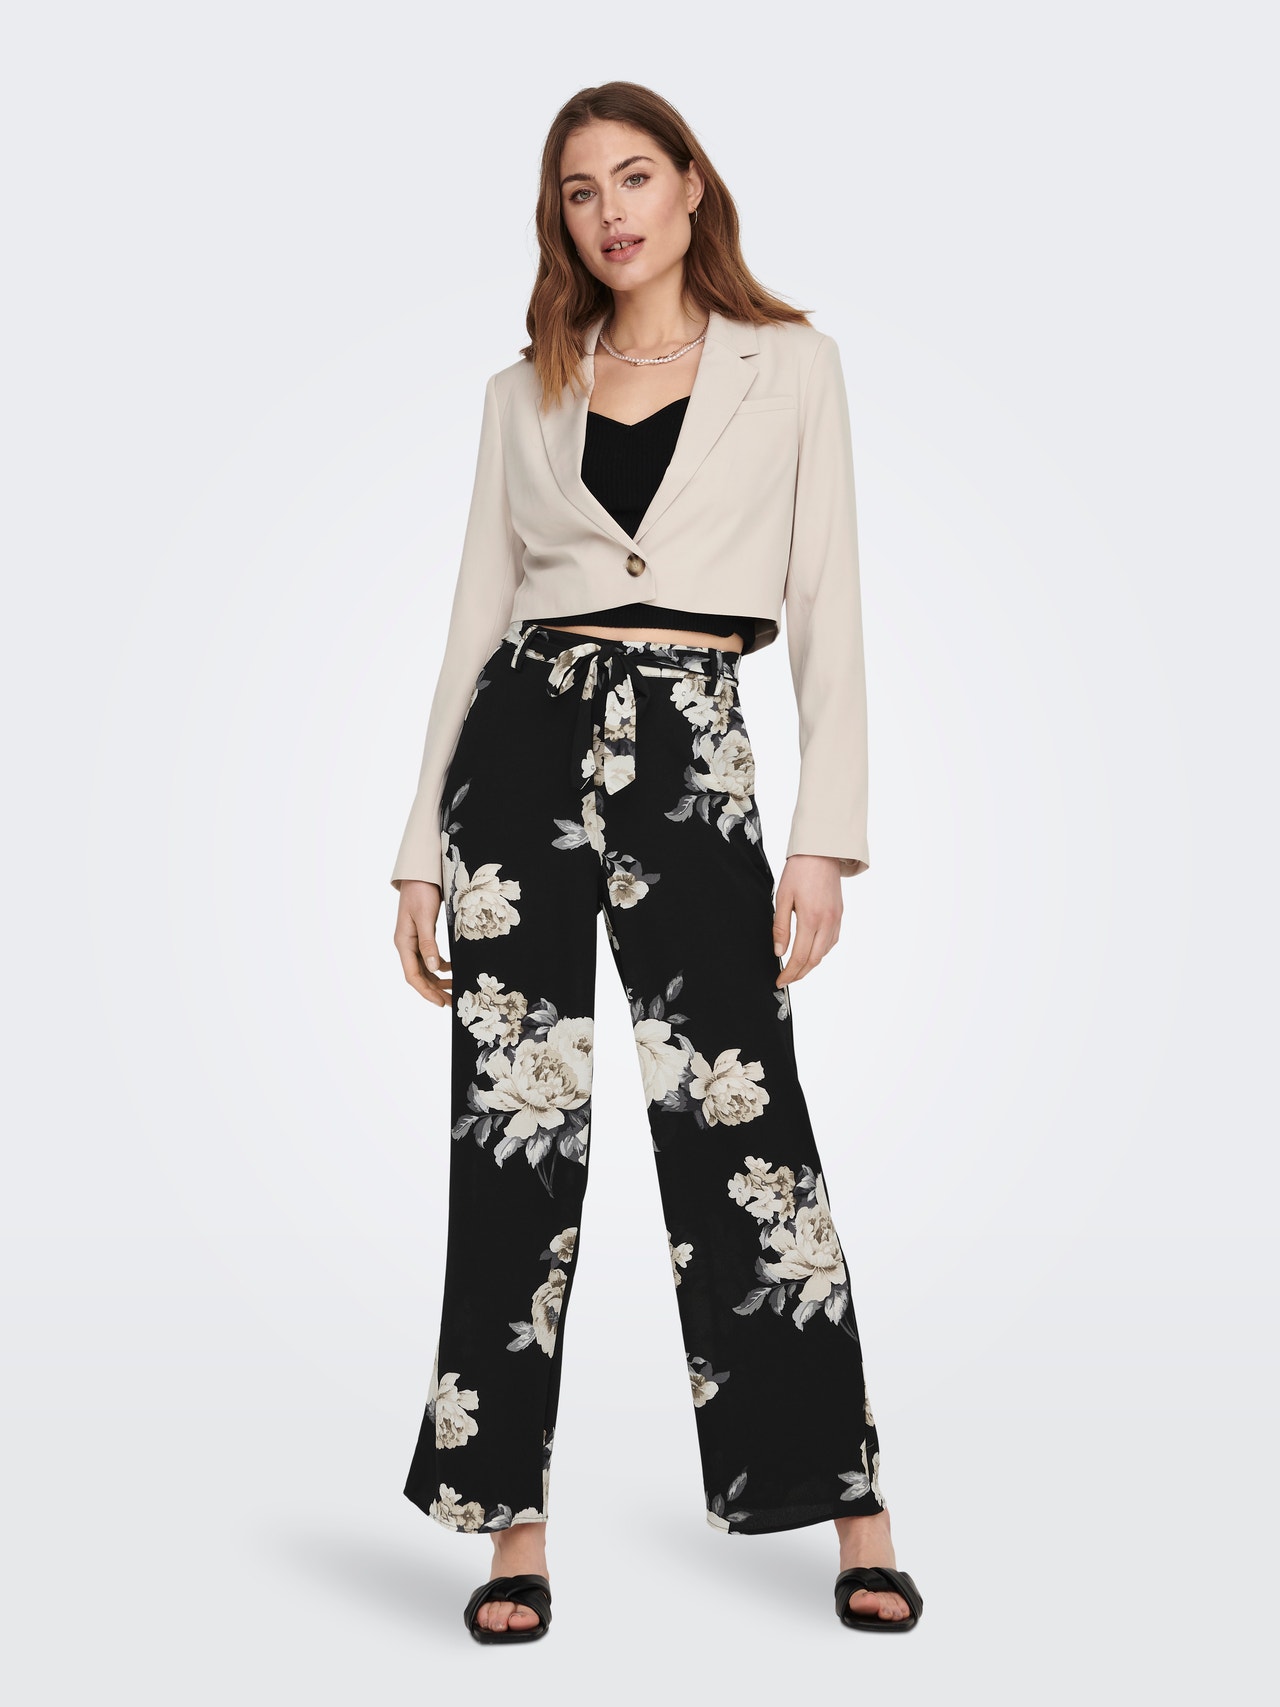 ONLY Patterned Trousers -Black - 15264449